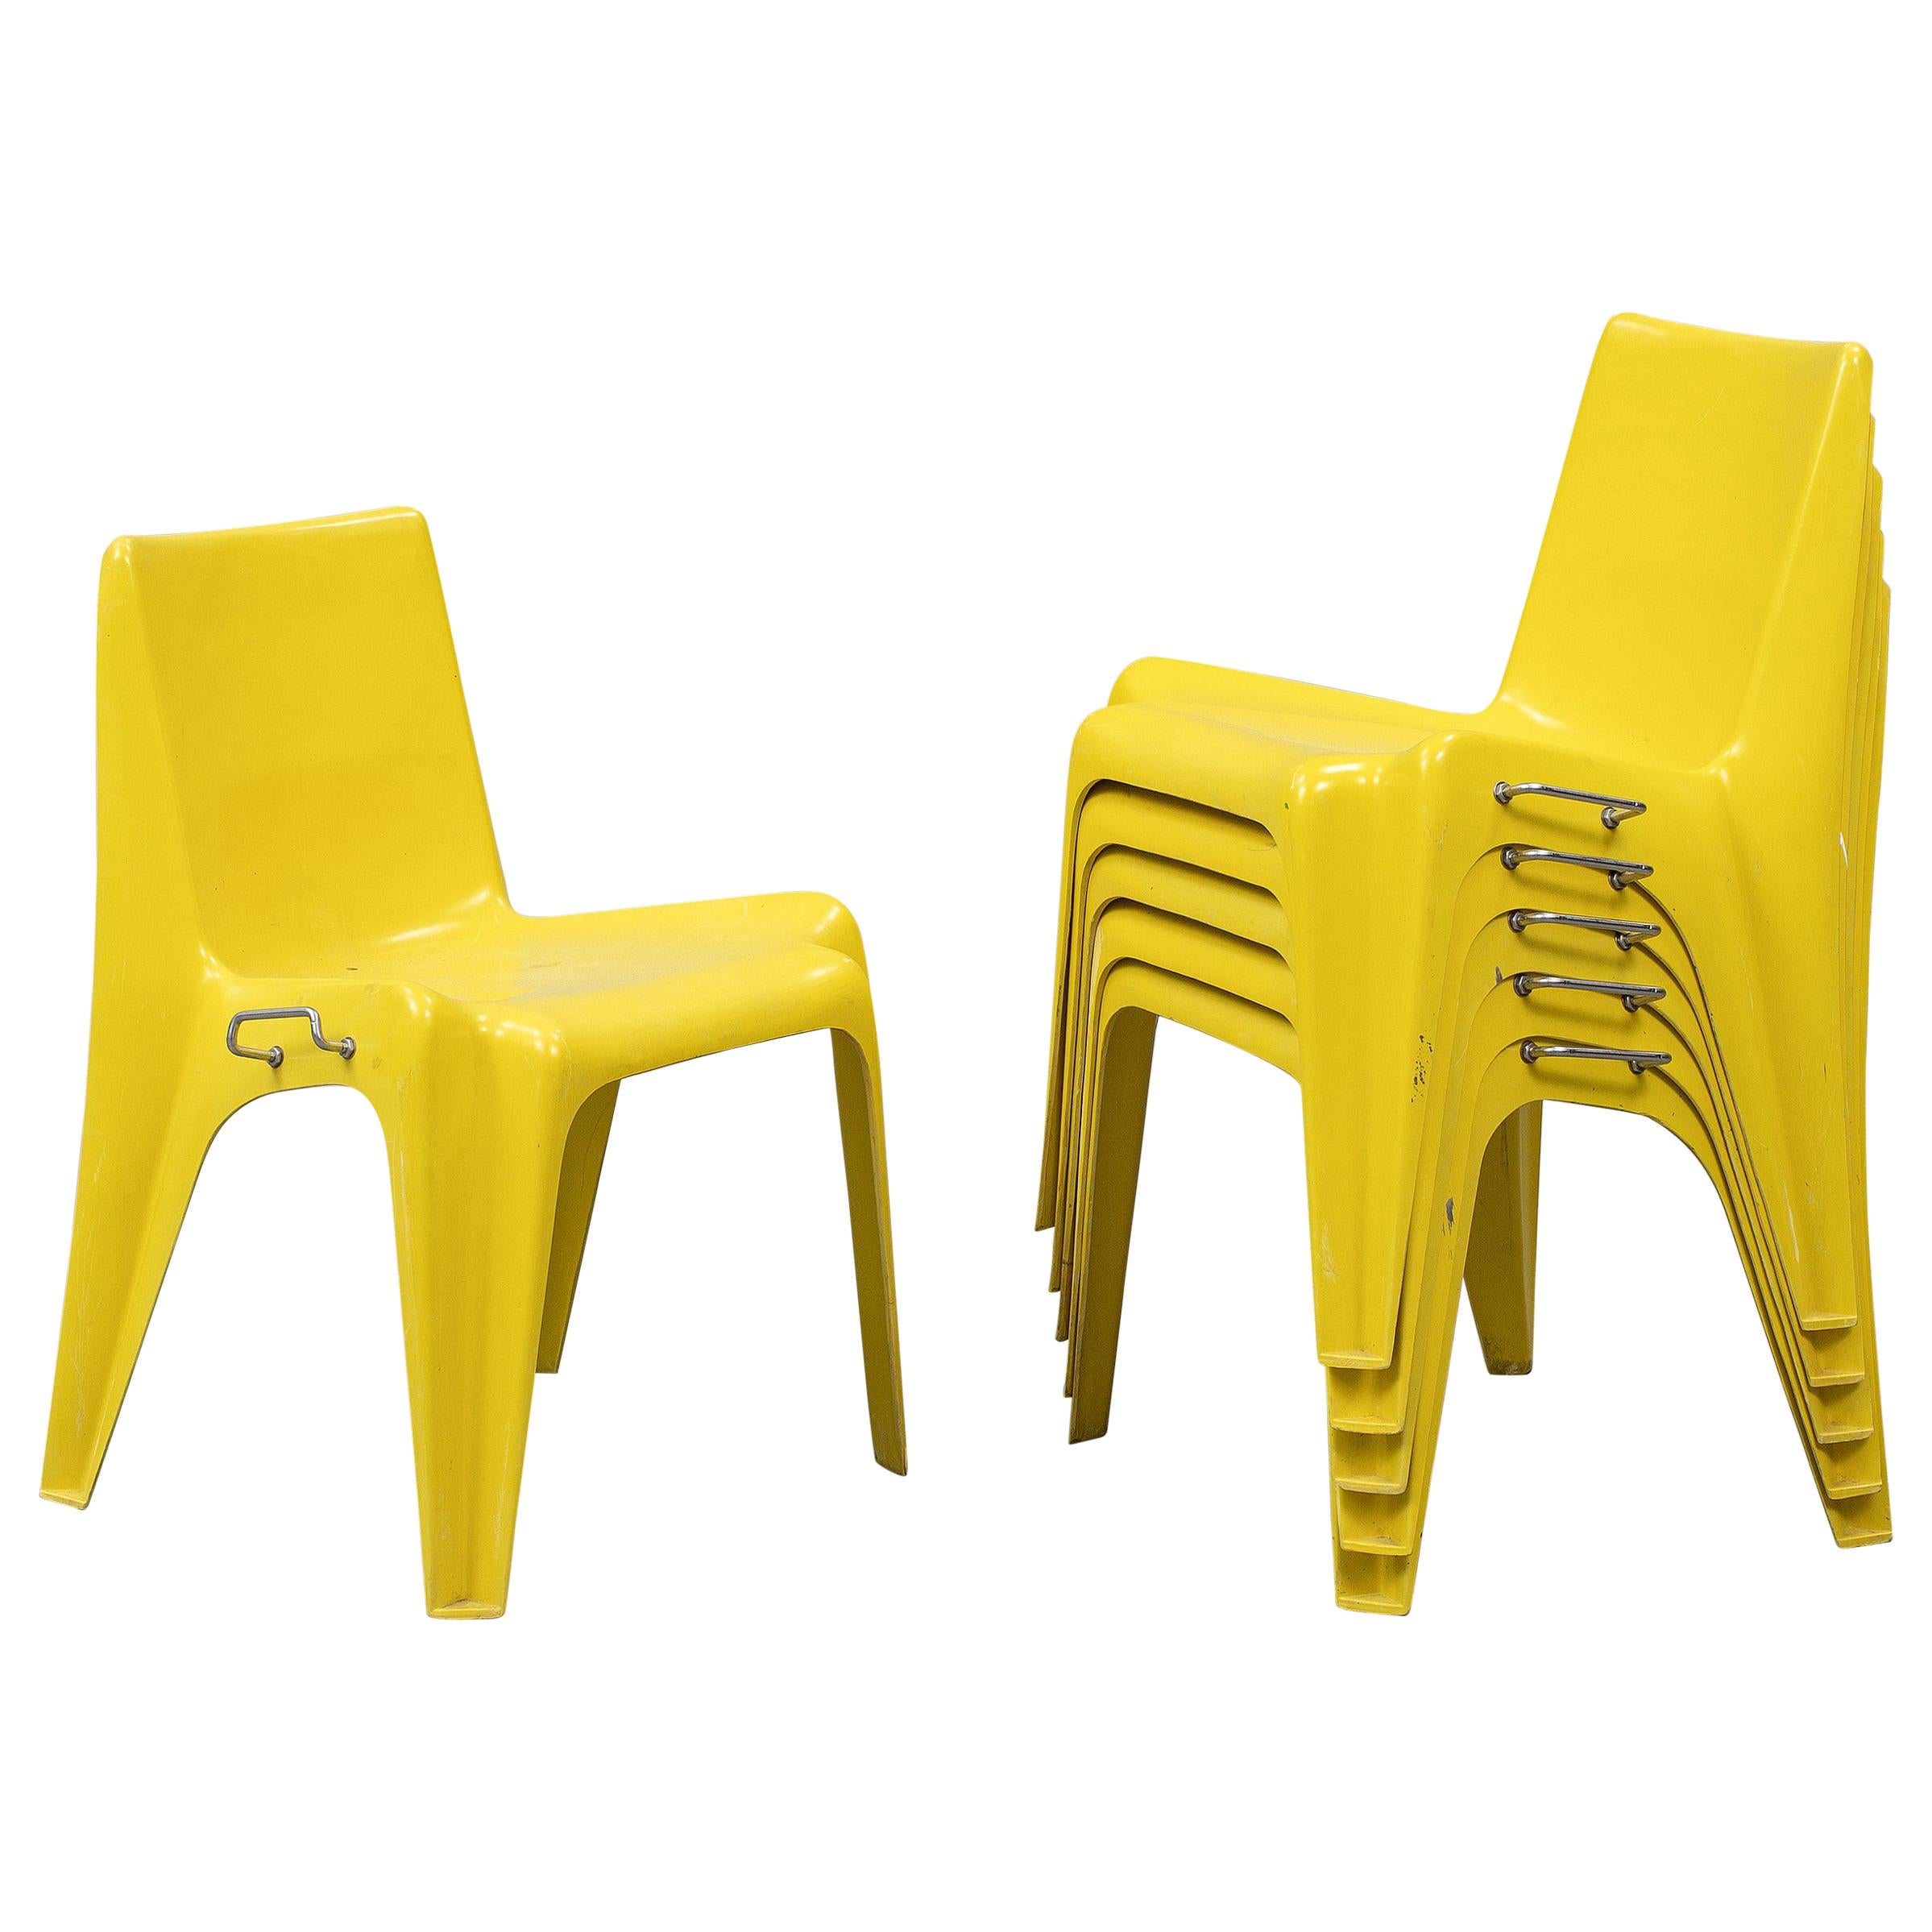 Stackable Bofinger Yellow Chairs by Helmut Batzner, First Edition